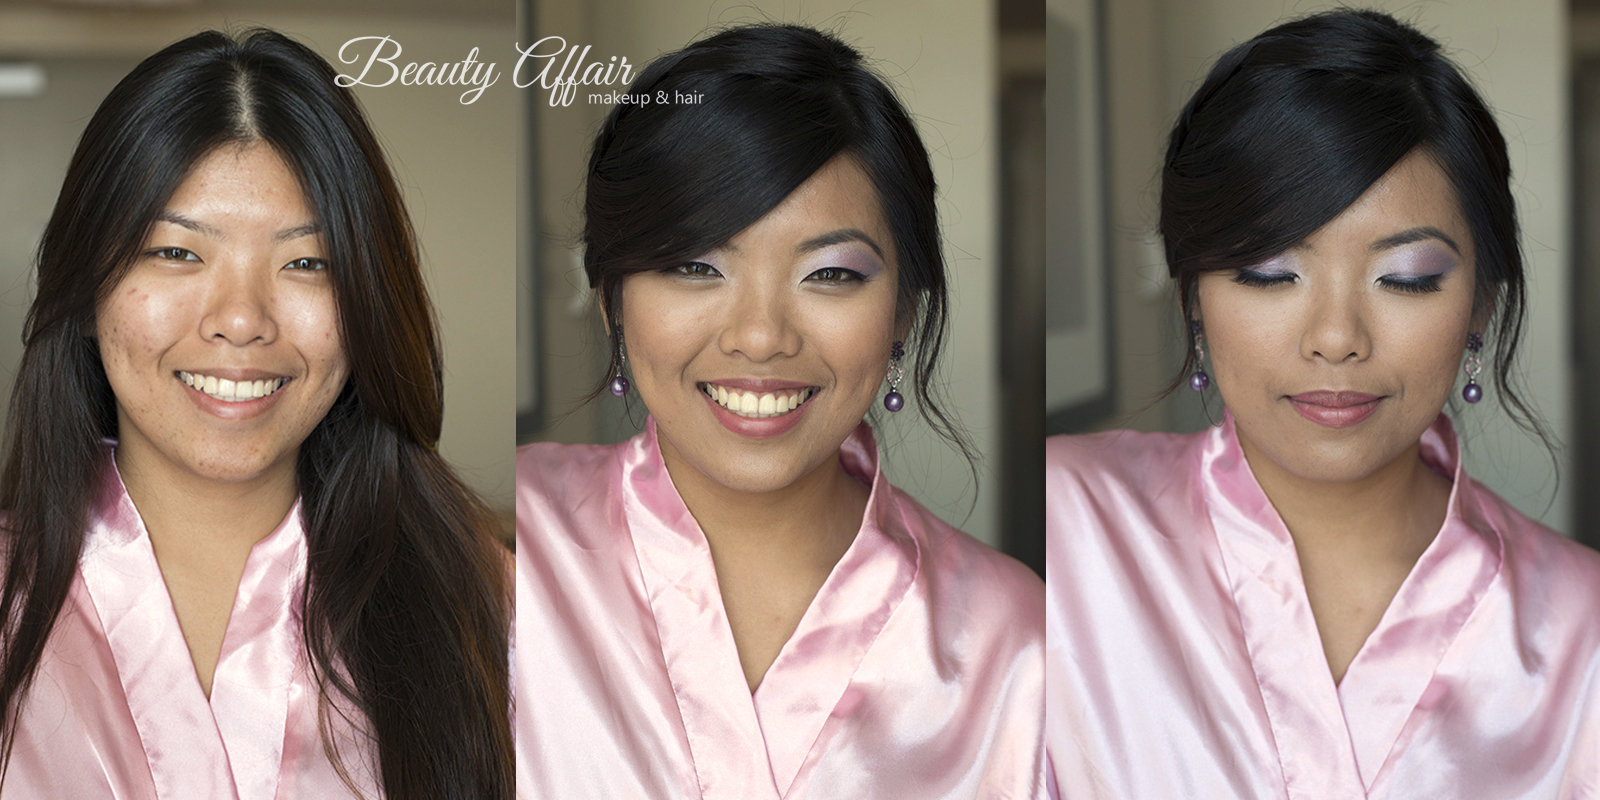 Beauty Affair makeup and makeup Los Angeles before and after bridesmaid pink lips purple eyeshadow.jpg